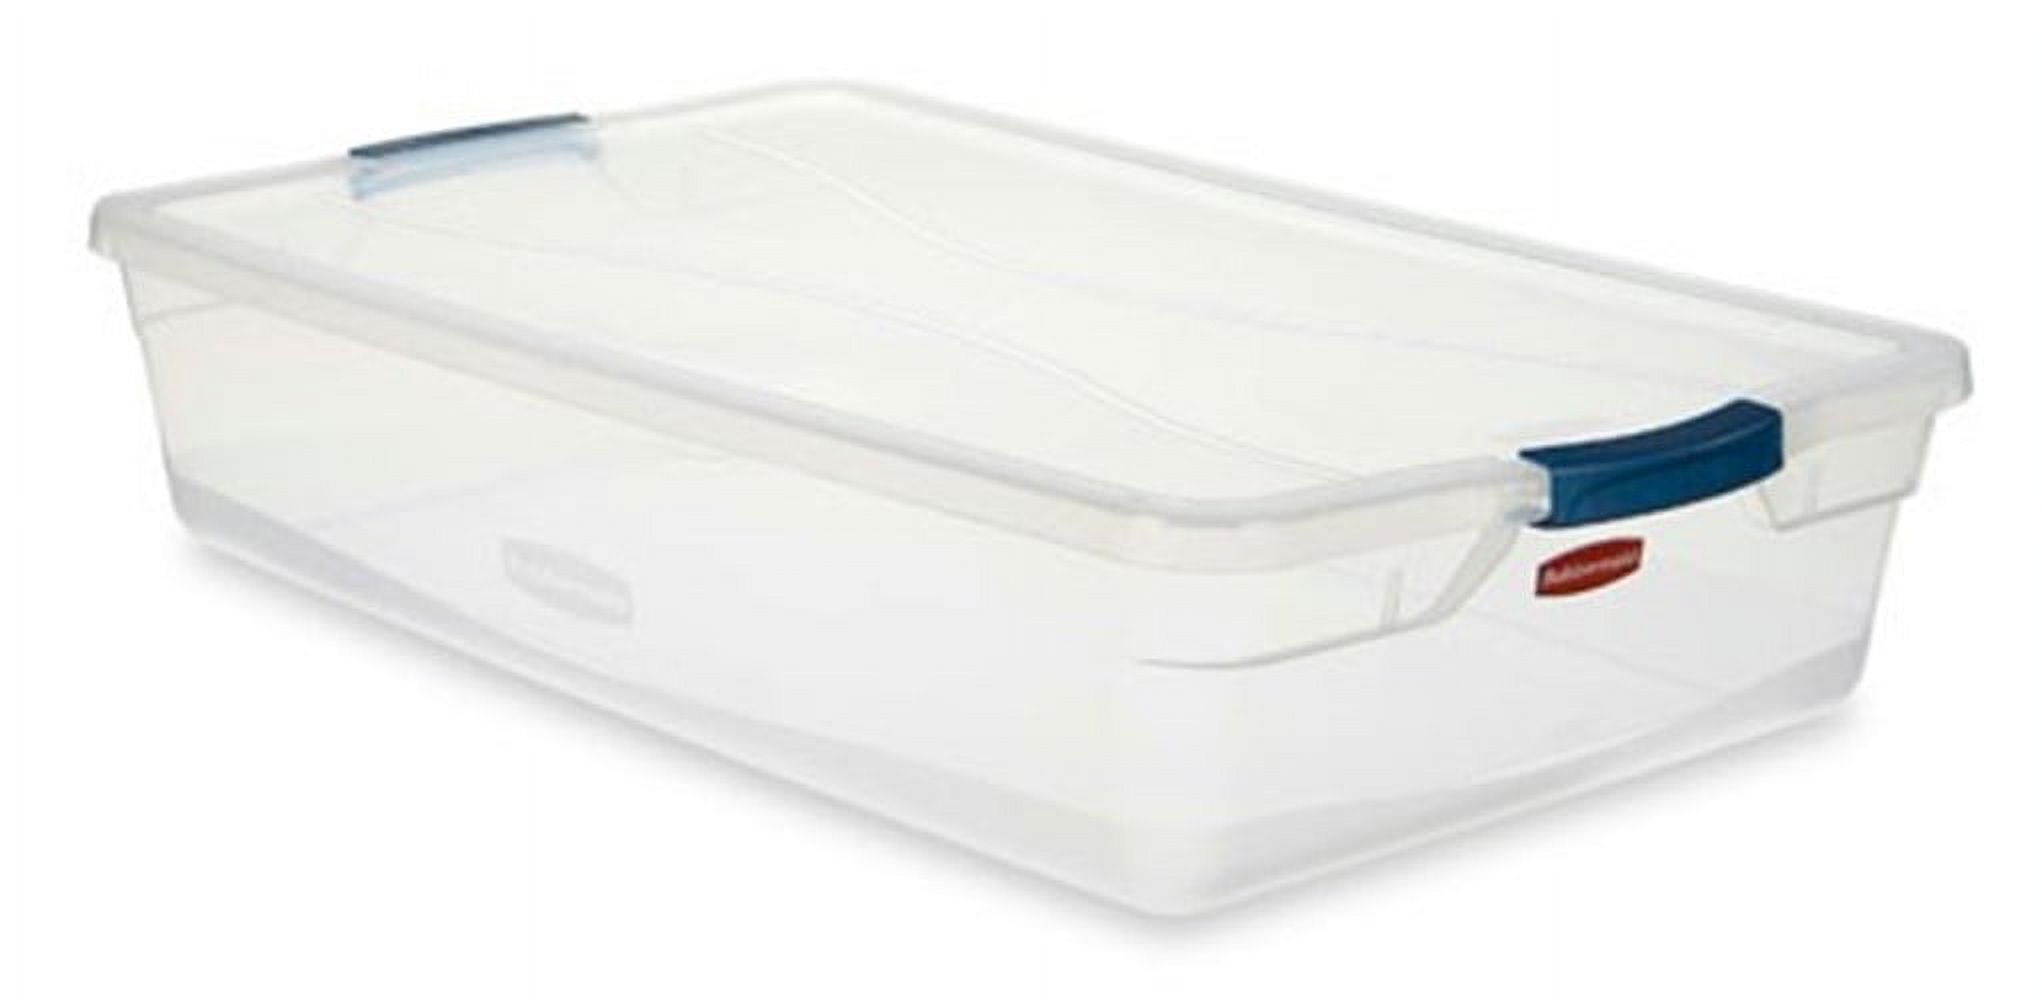 STORAGE TOTE CLEAR 41QT - image 2 of 2